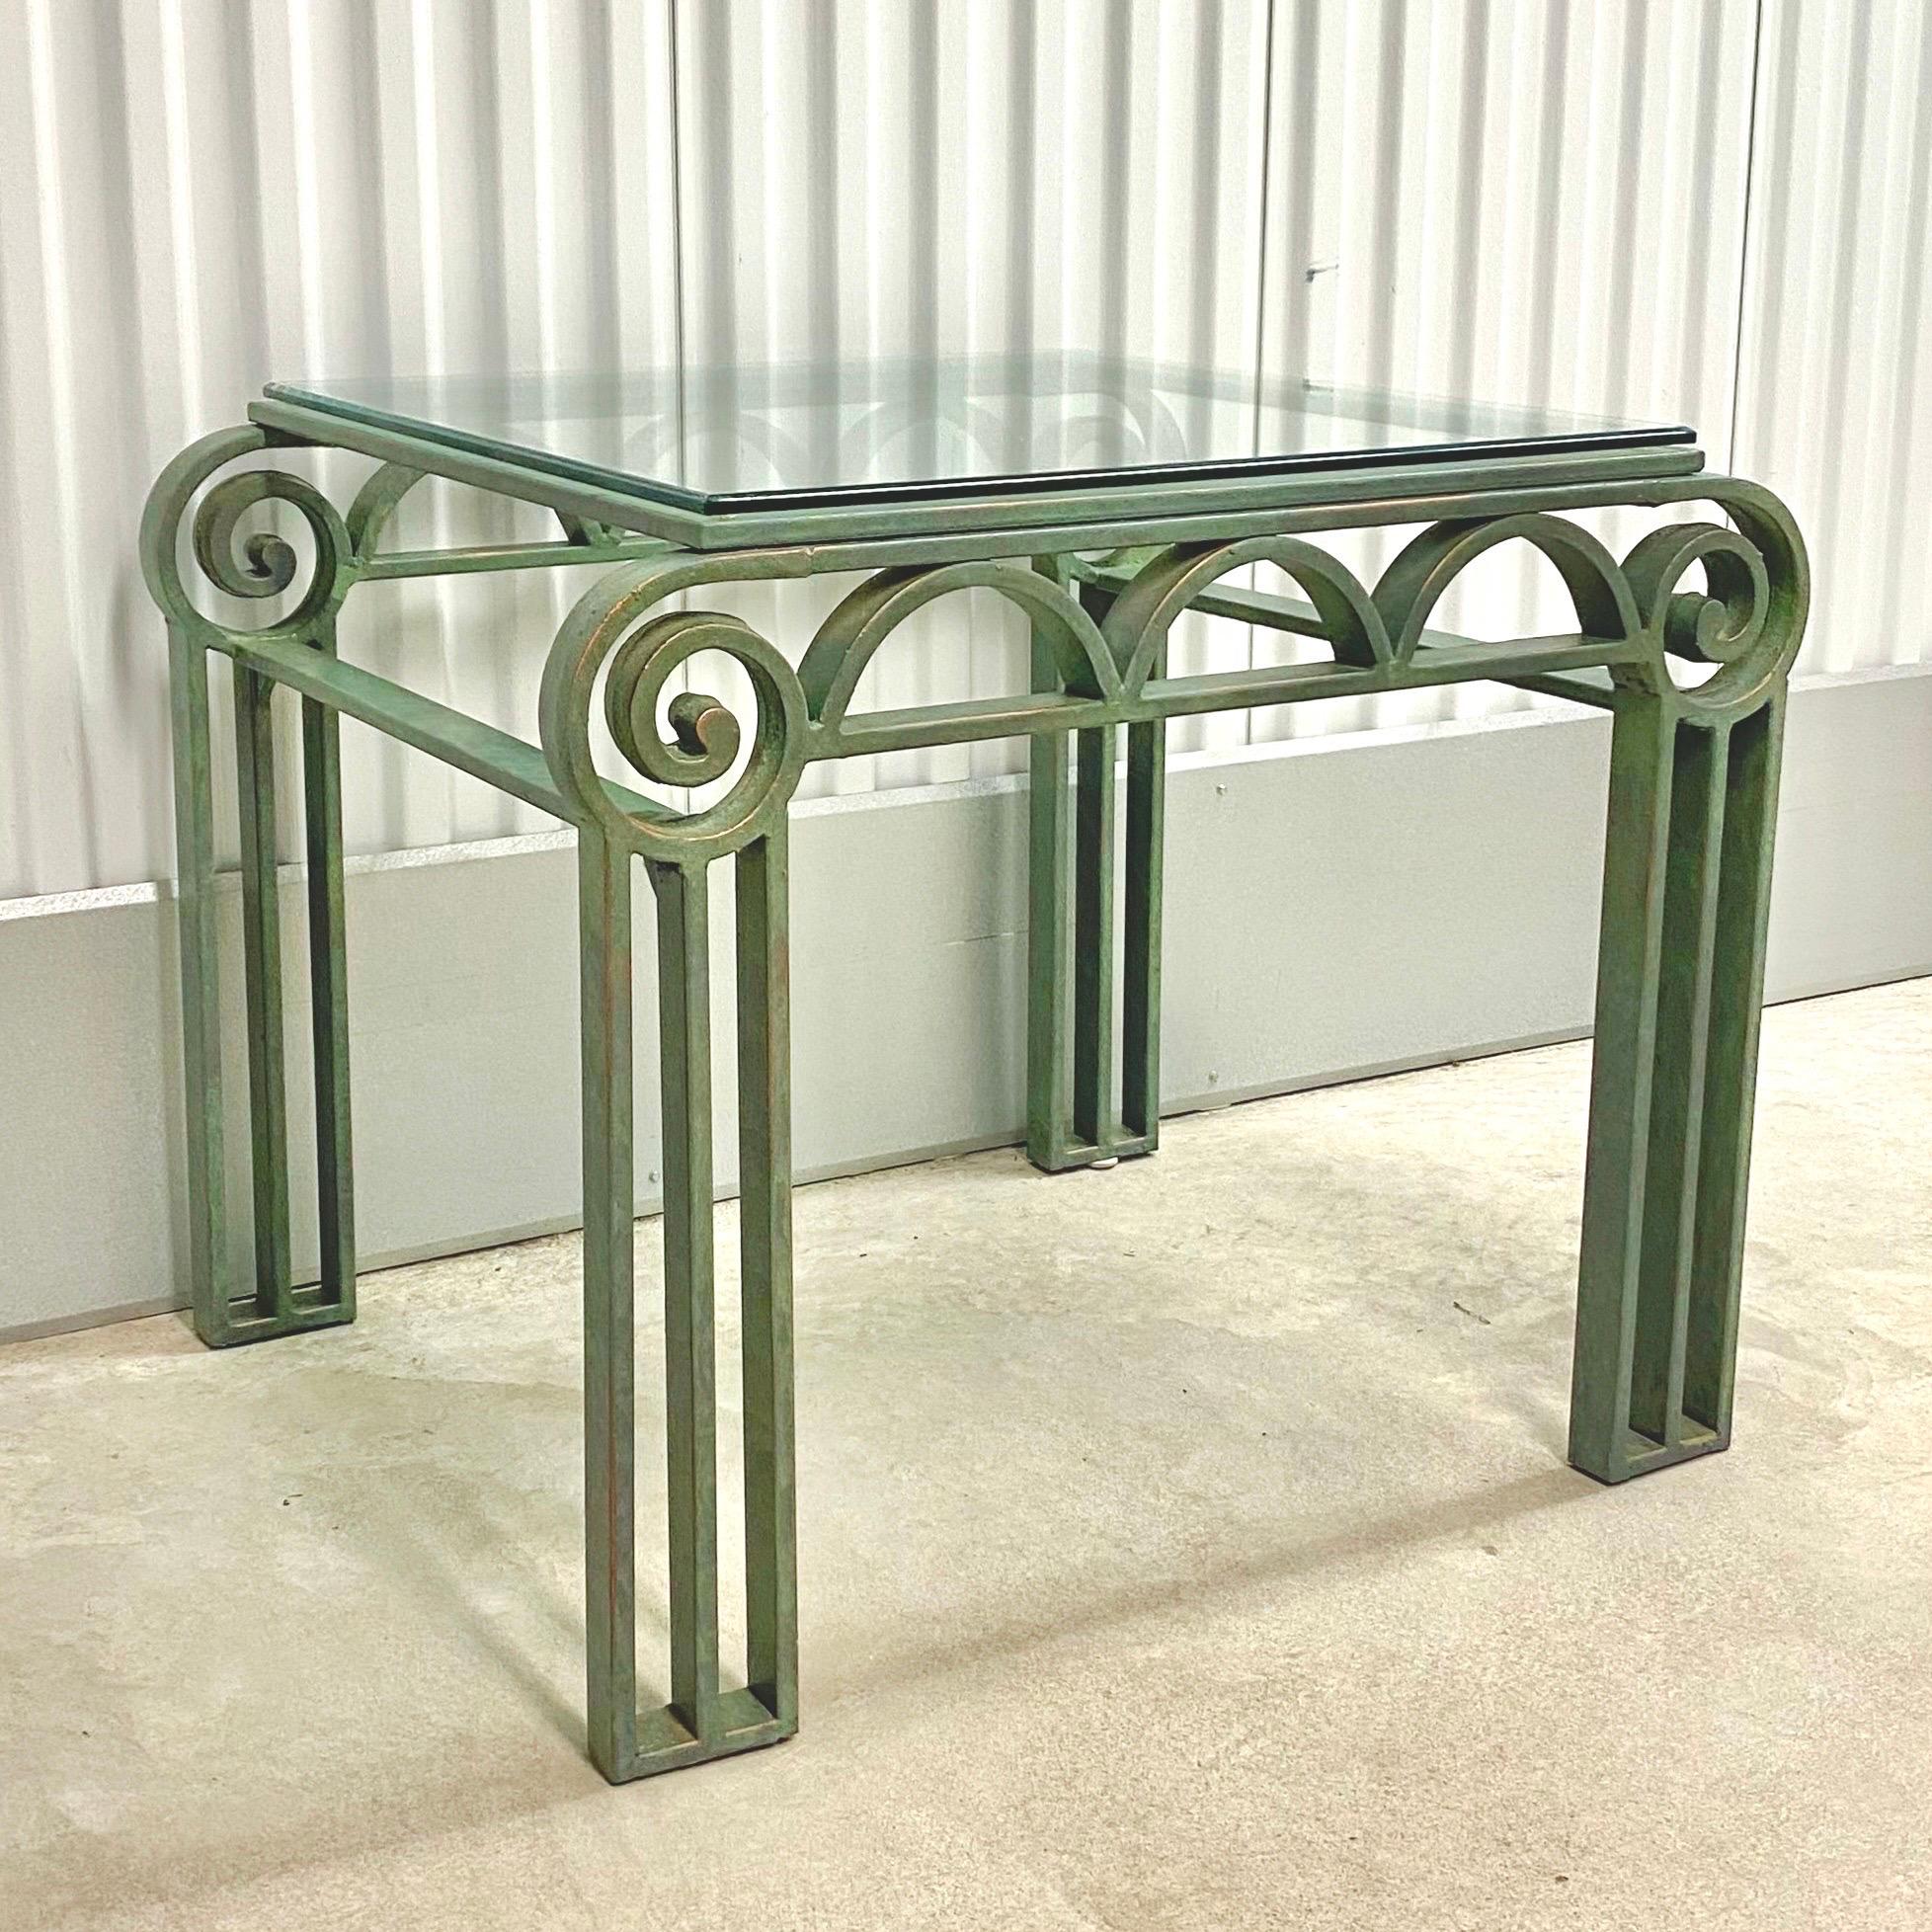 Vintage circa 1990s iron table with verdigris finish. Green painted iron with column legs meeting scrolled corners and half moon apron. Glass top. Available matching coffee table available separately as seen in the last image.